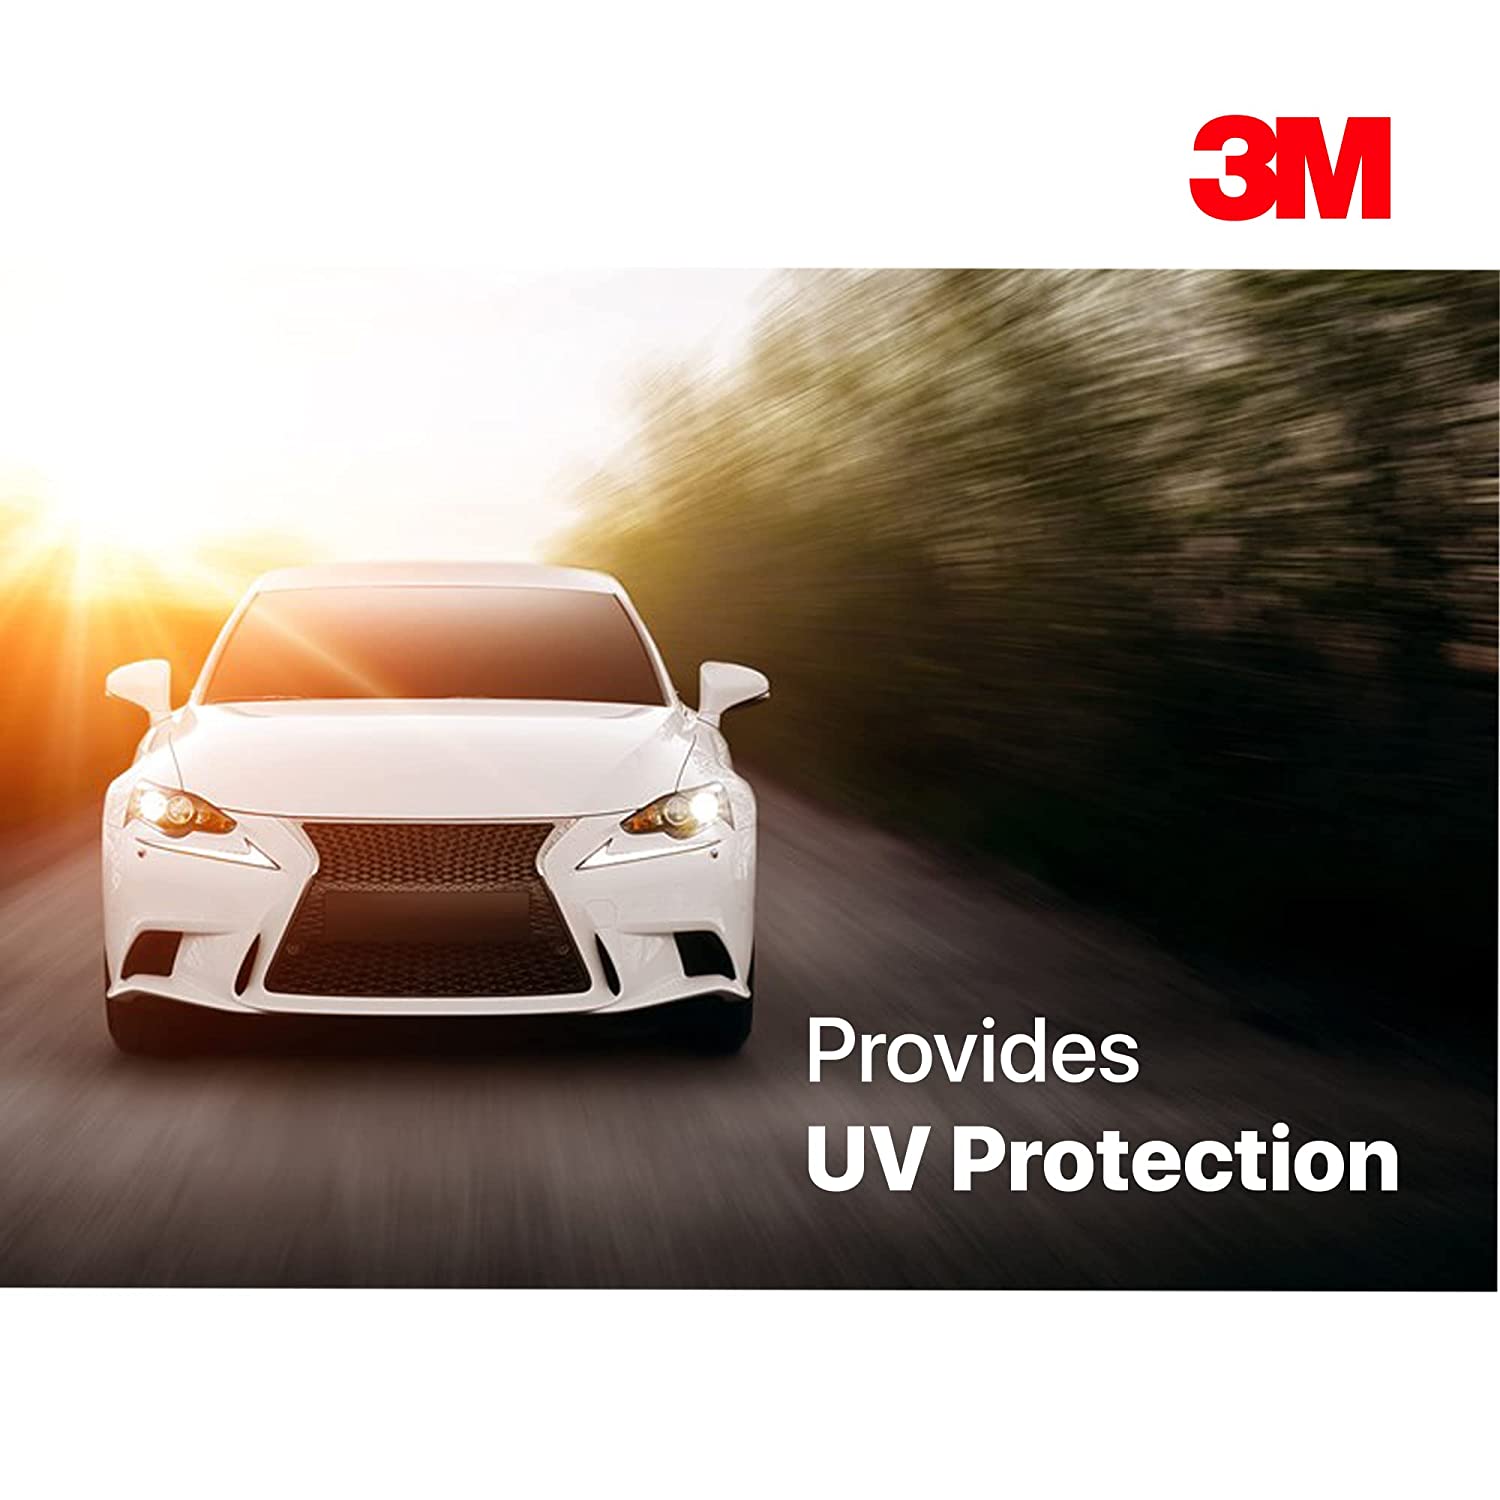 3M Auto Specialty Liquid Wax (200ml) Restores gloss on car paint Water Repellent and UV Protection-Car Accessories-dealsplant